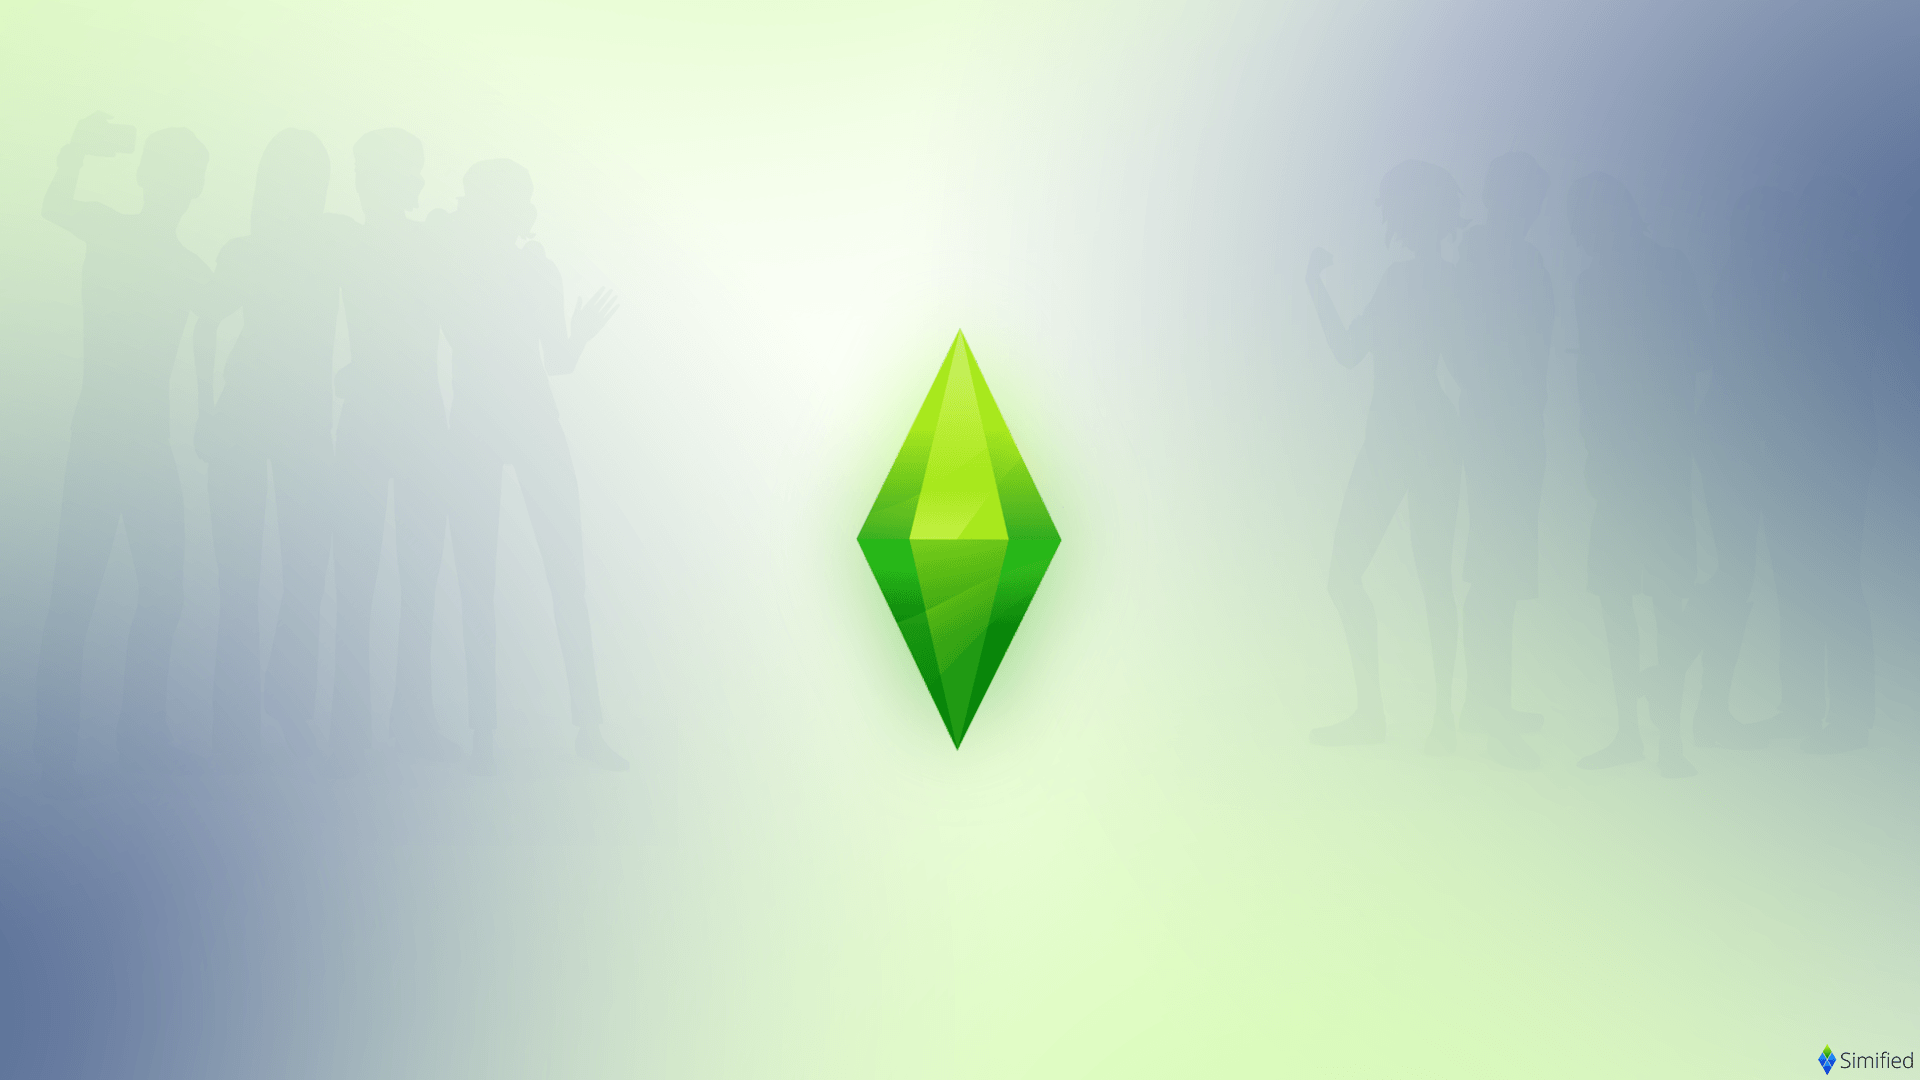 The Sims Wallpaper High Quality